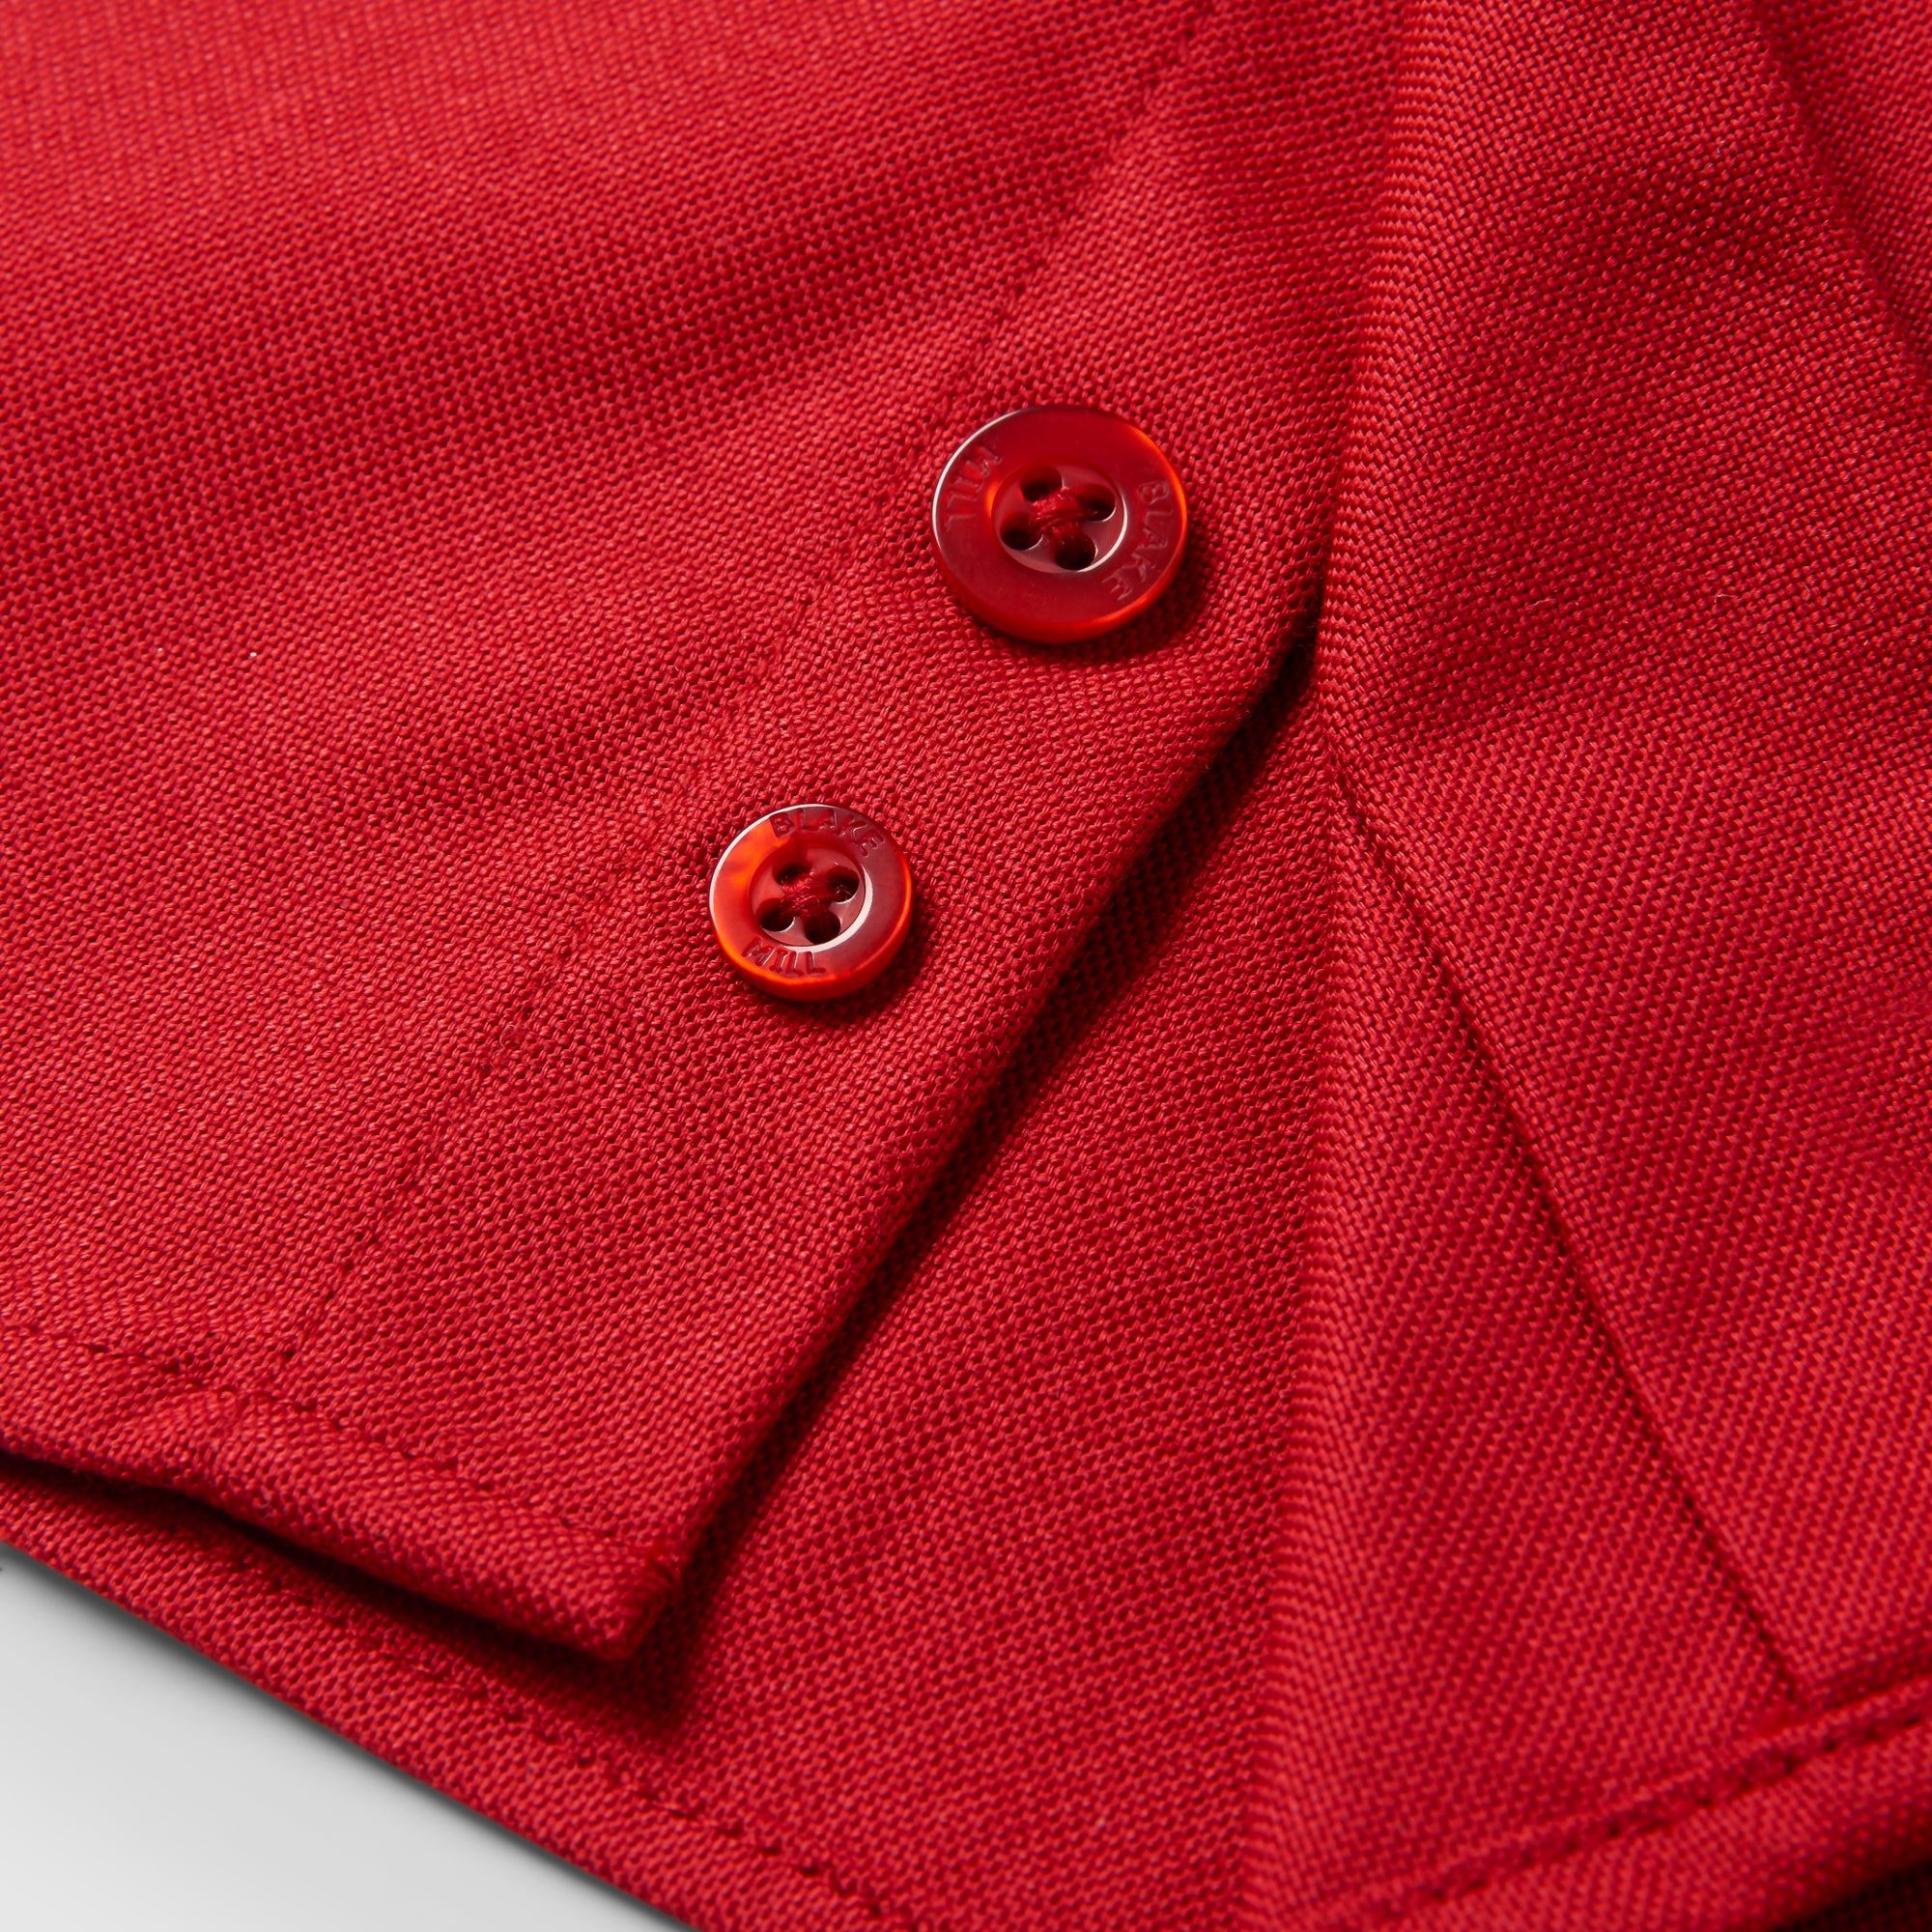 Red Oxford with Midlands Accents Button-Down Shirt